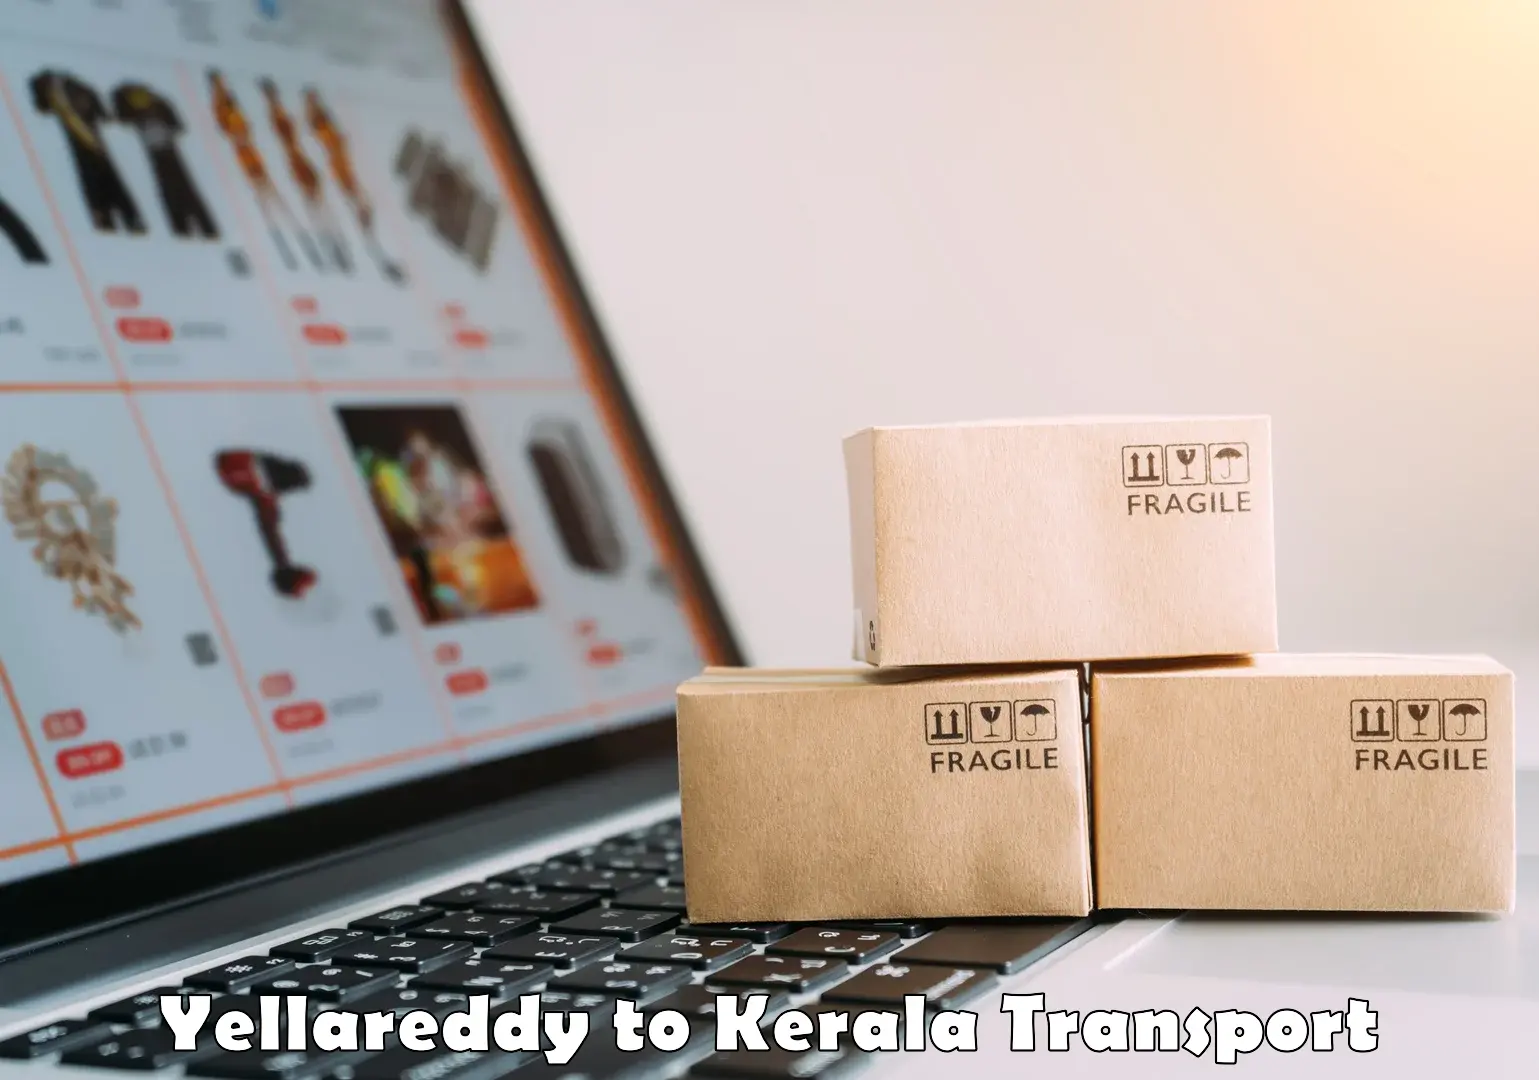 Goods delivery service Yellareddy to Ramankary